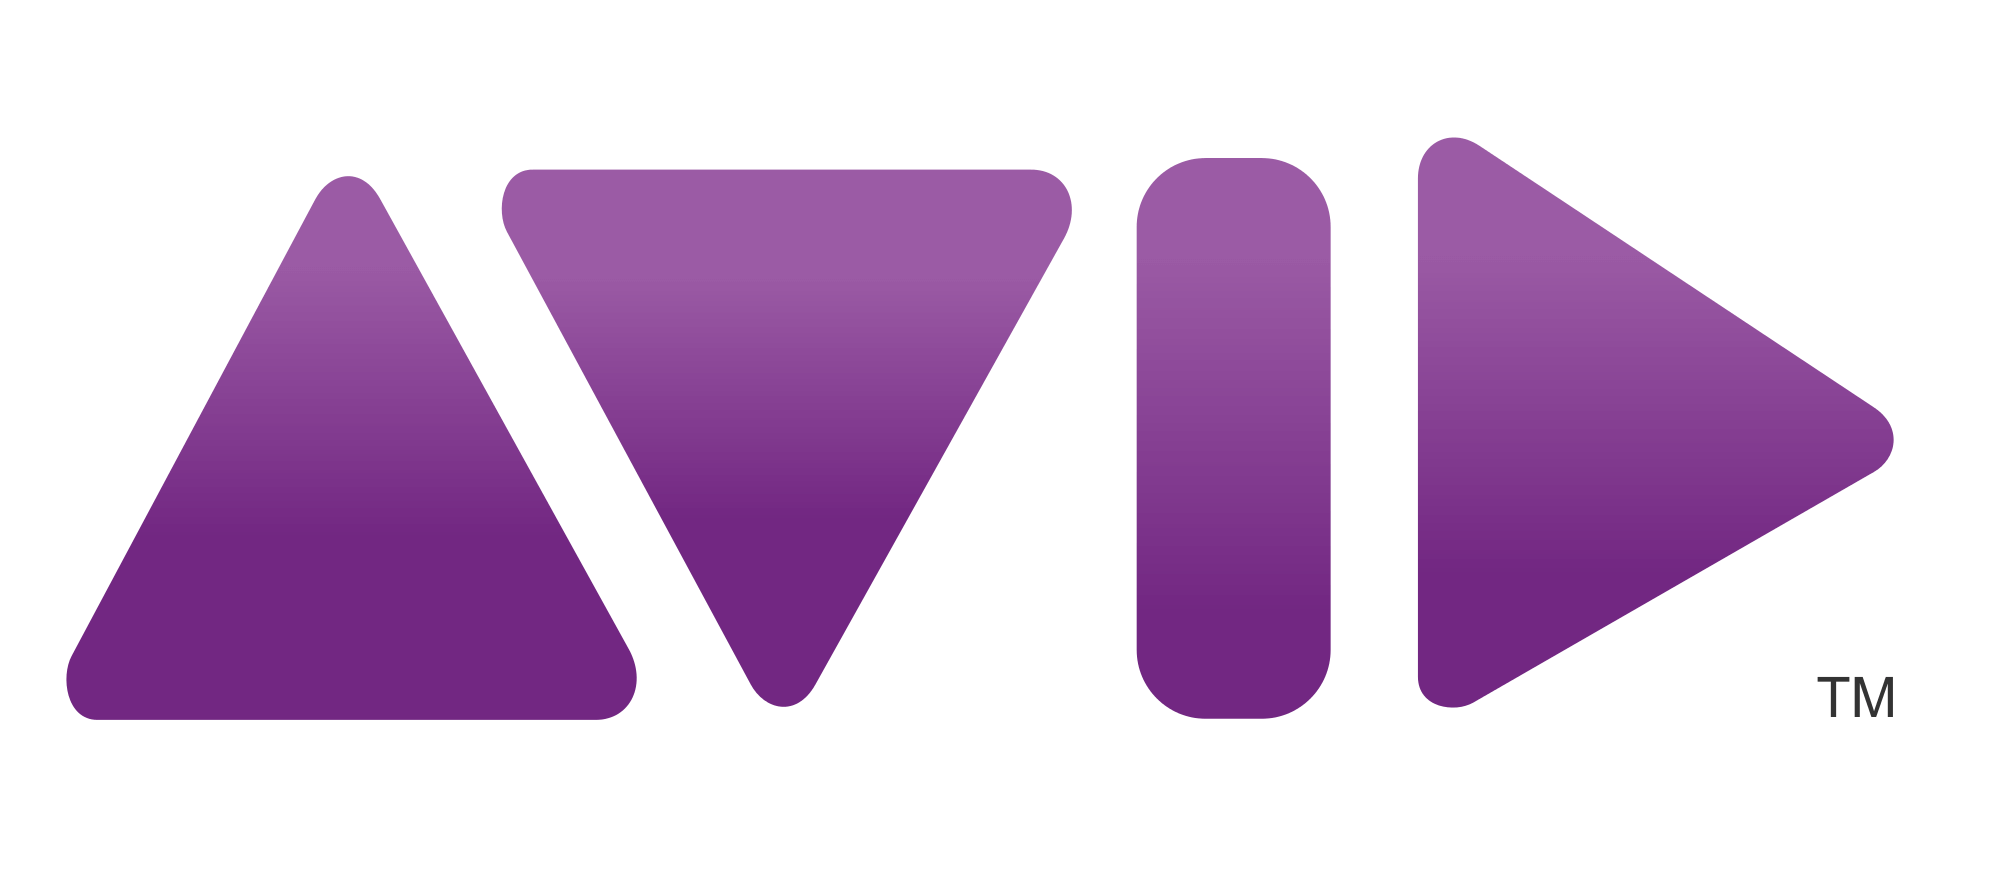 Media Leaders to Redefine the Future of the Industry at Avid Connect